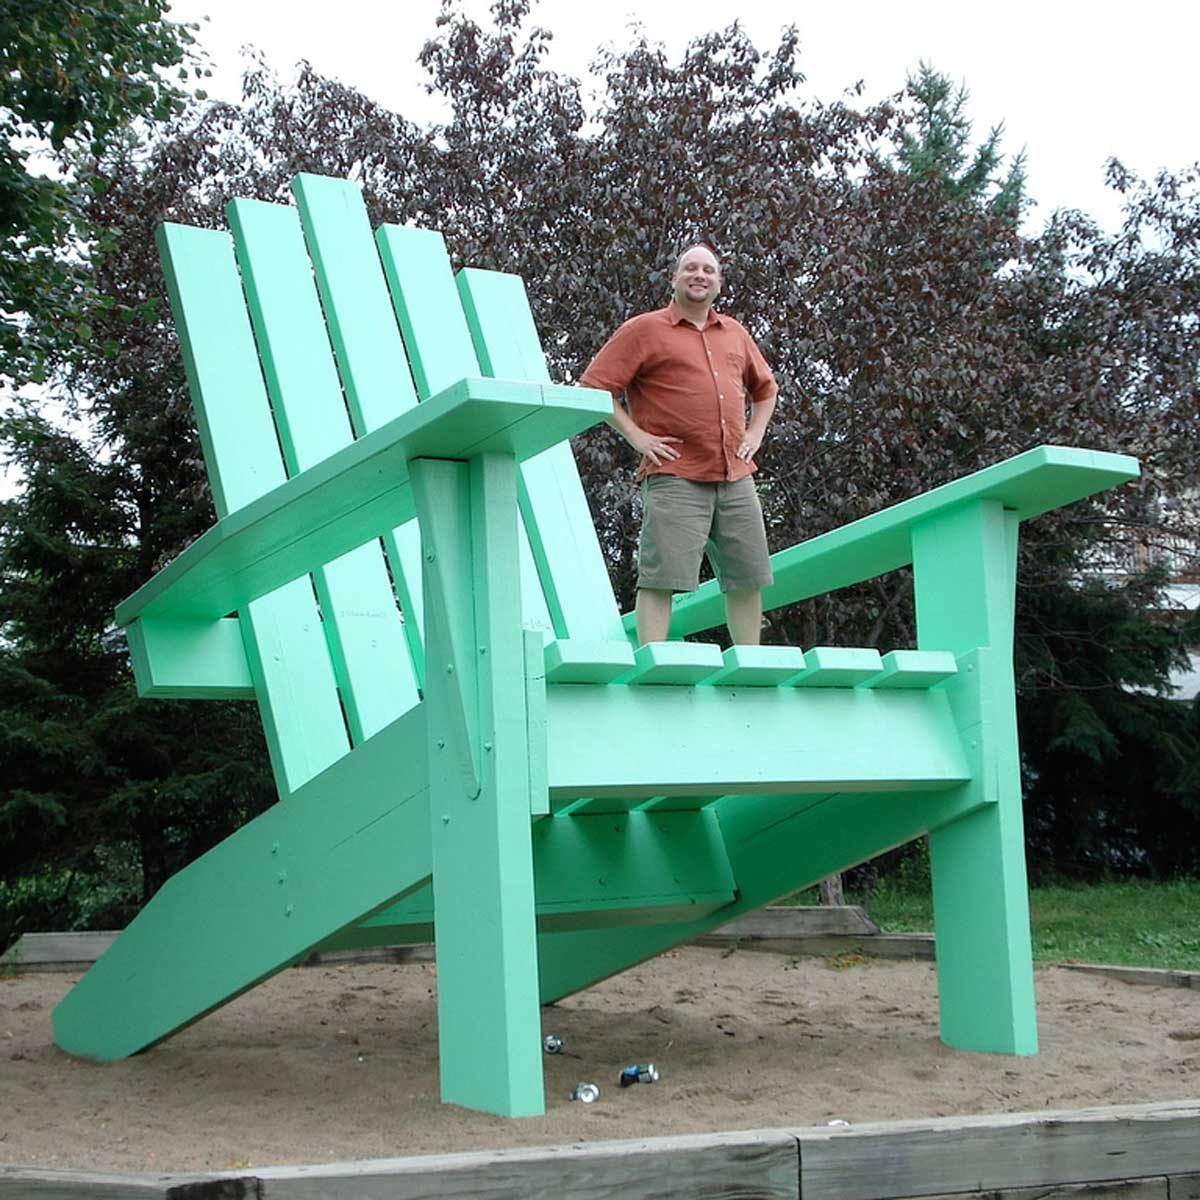 This Tricked-Out Adirondack Chair Is Going Viral for Summer